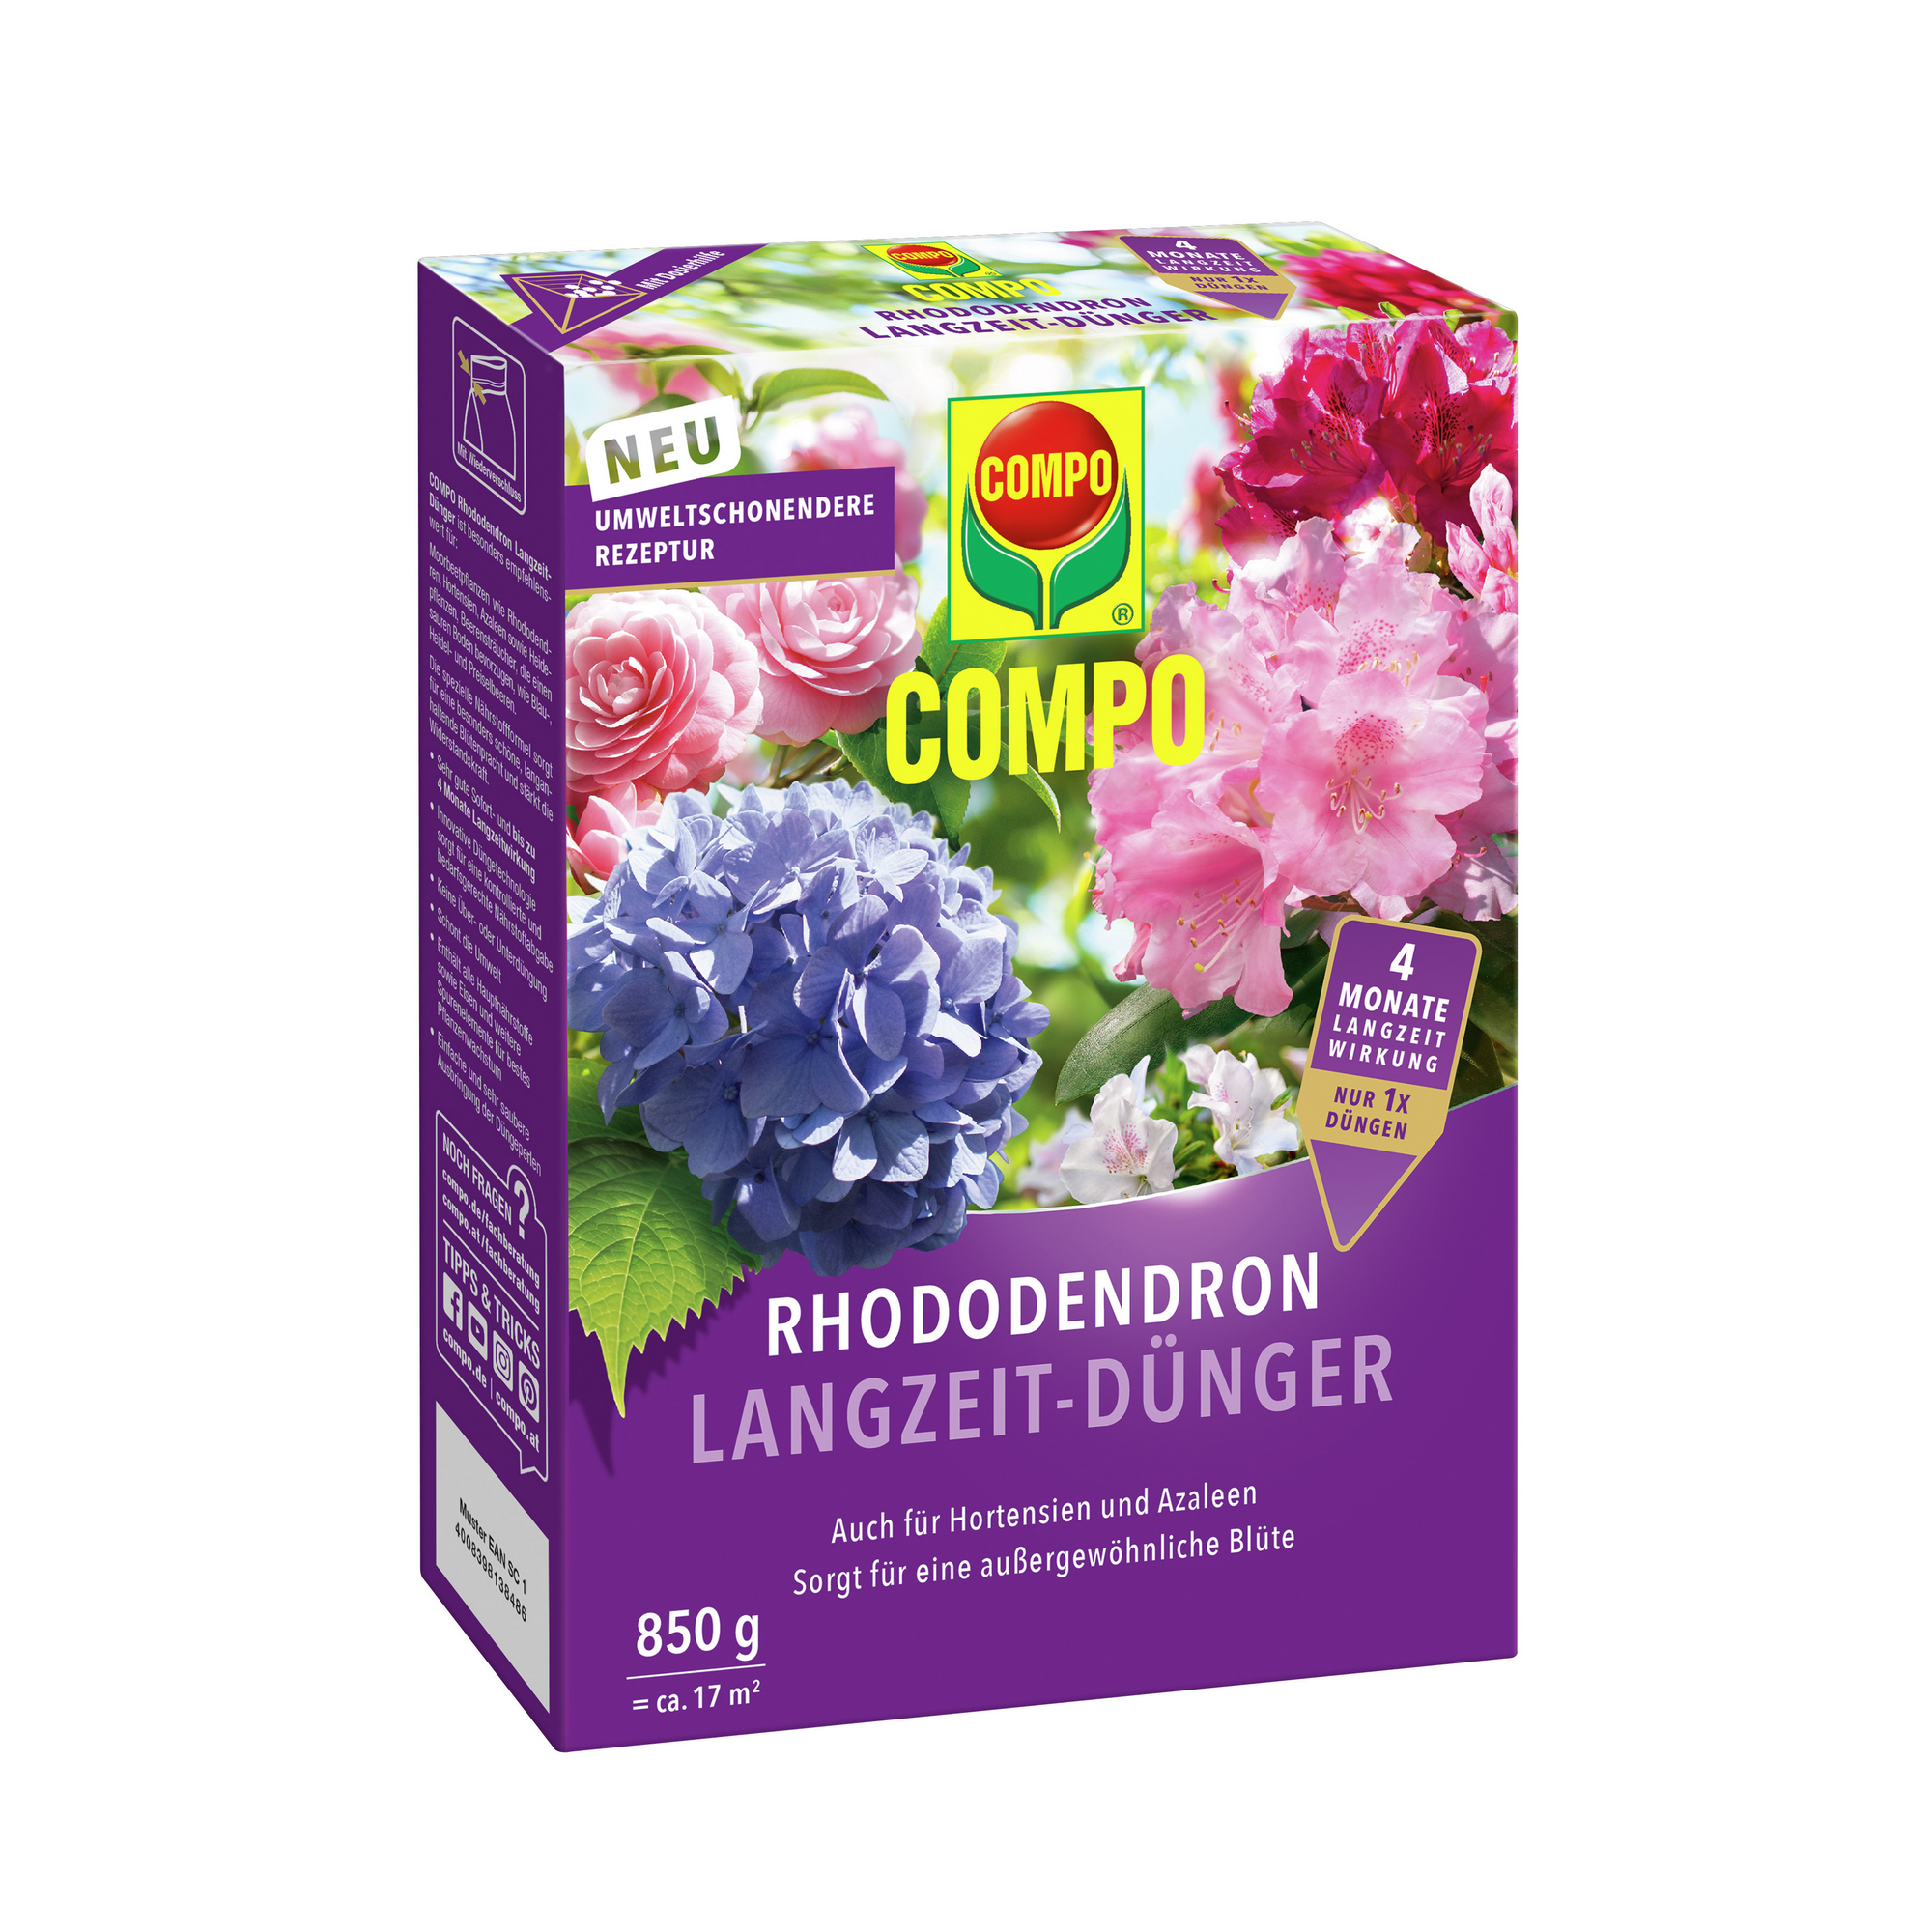 Rhododendron-Langzeitdünger 850 g + product picture